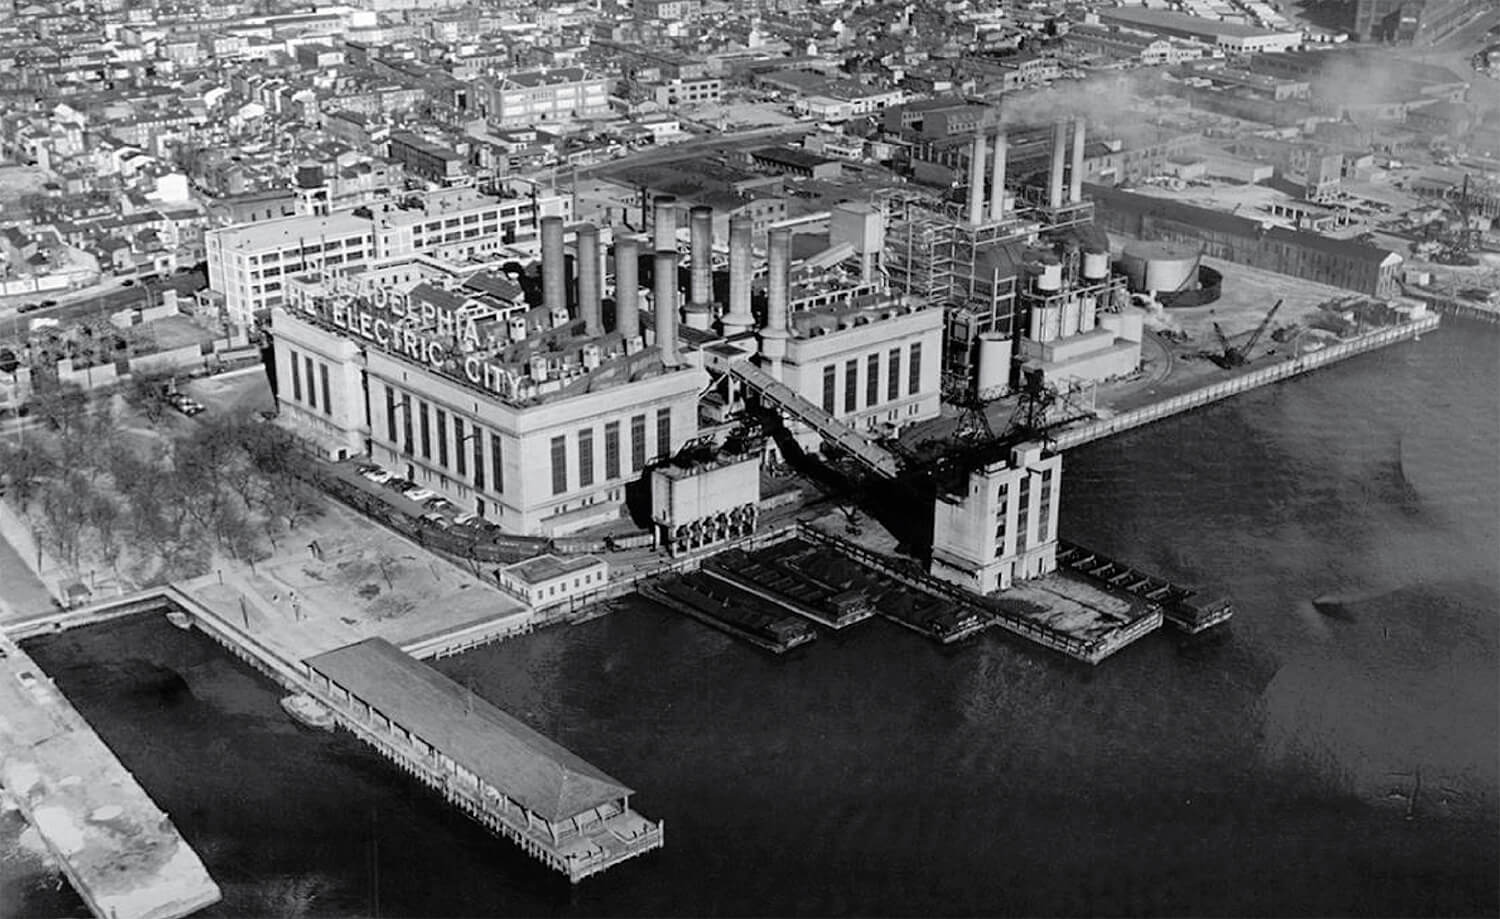 Photograph of large industrial plant from the air.